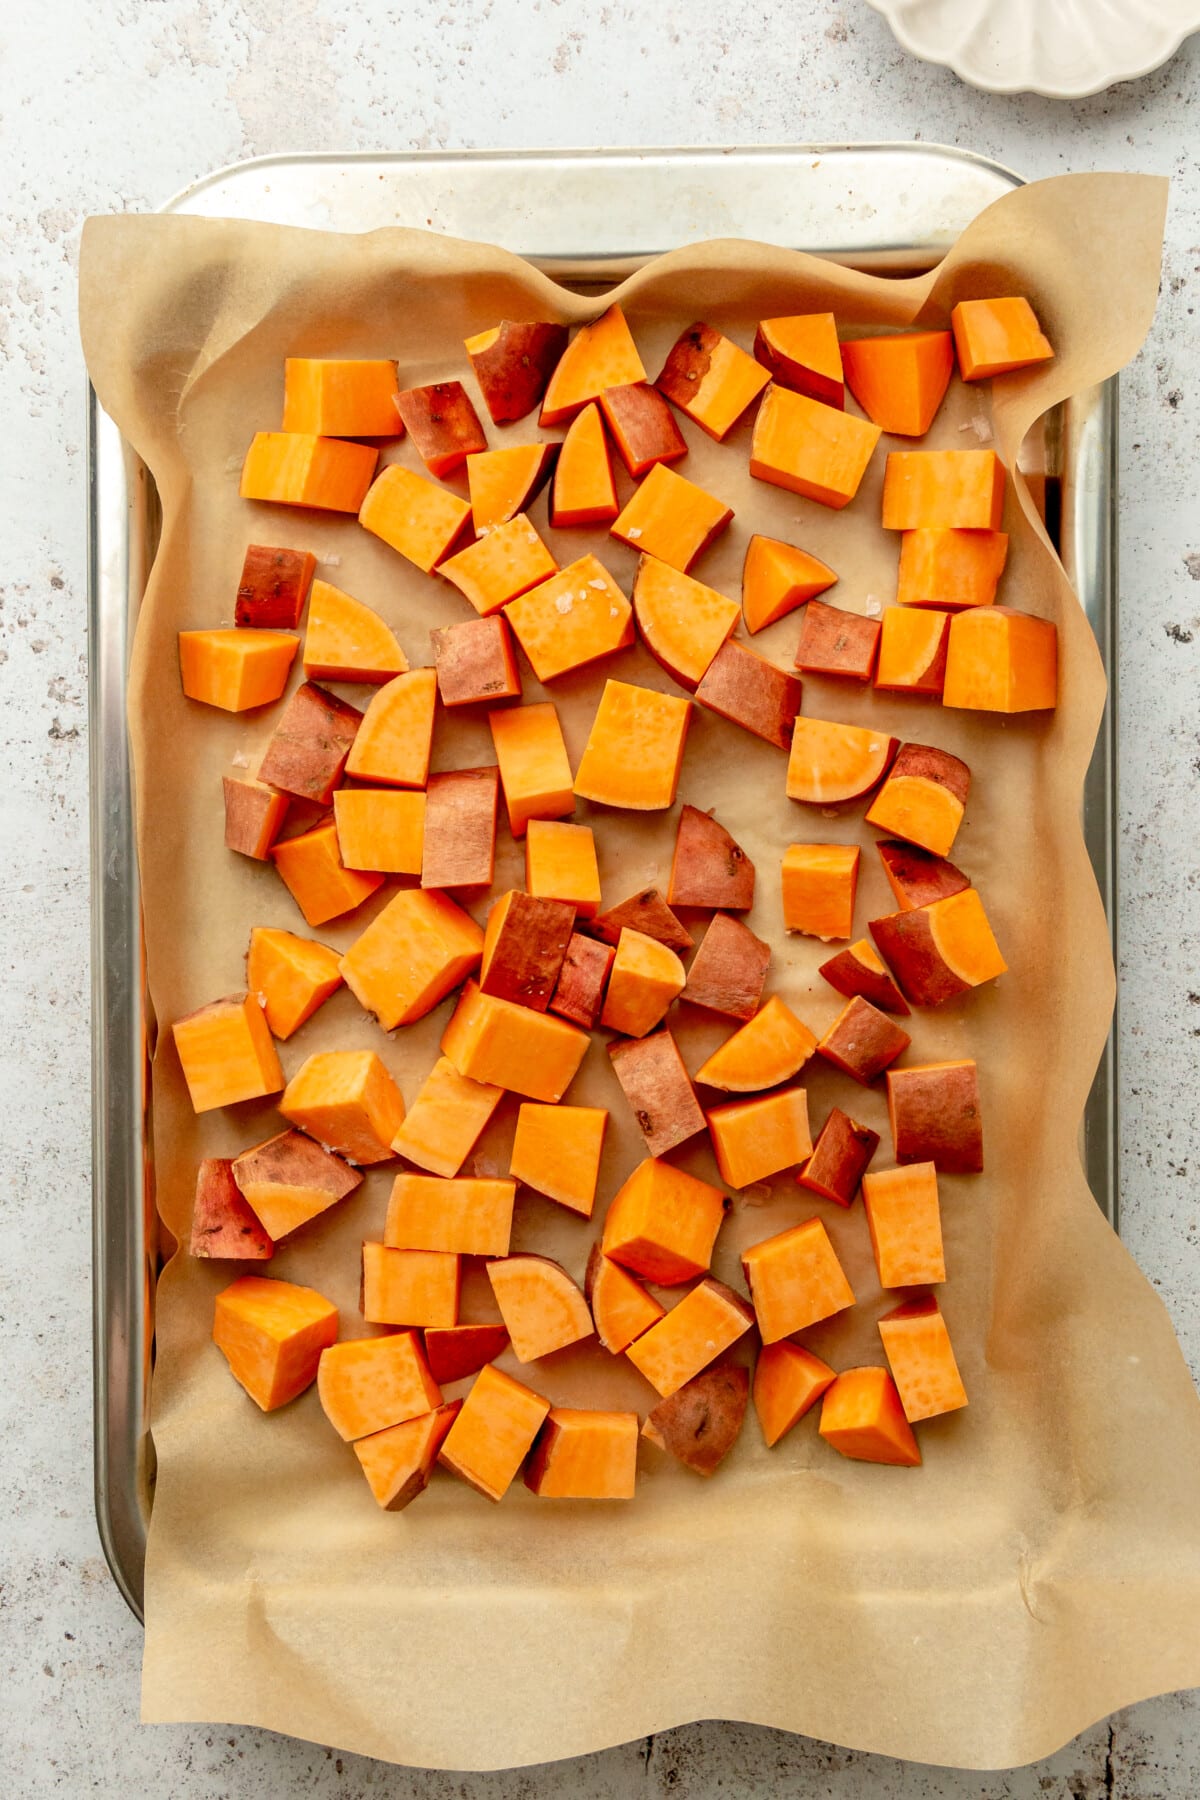 Cubes of sweet potato sit on a lined and rimmed stainless steel baking sheet on a light grey surface.